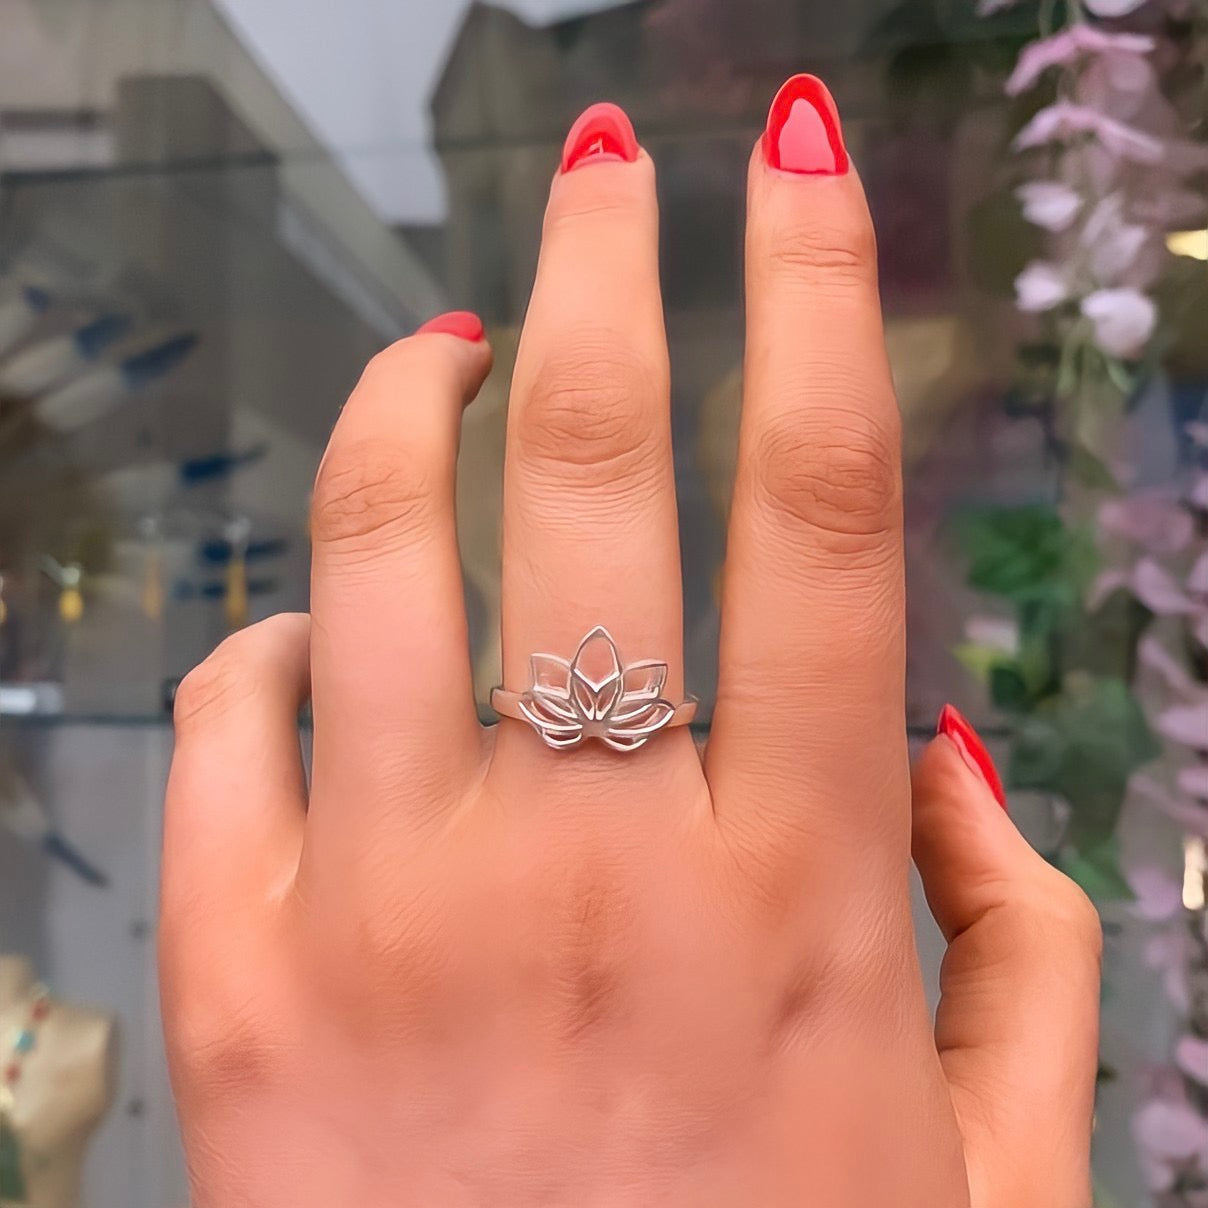 Dainty Sterling Silver Lotus Flower Ring - SIZE L